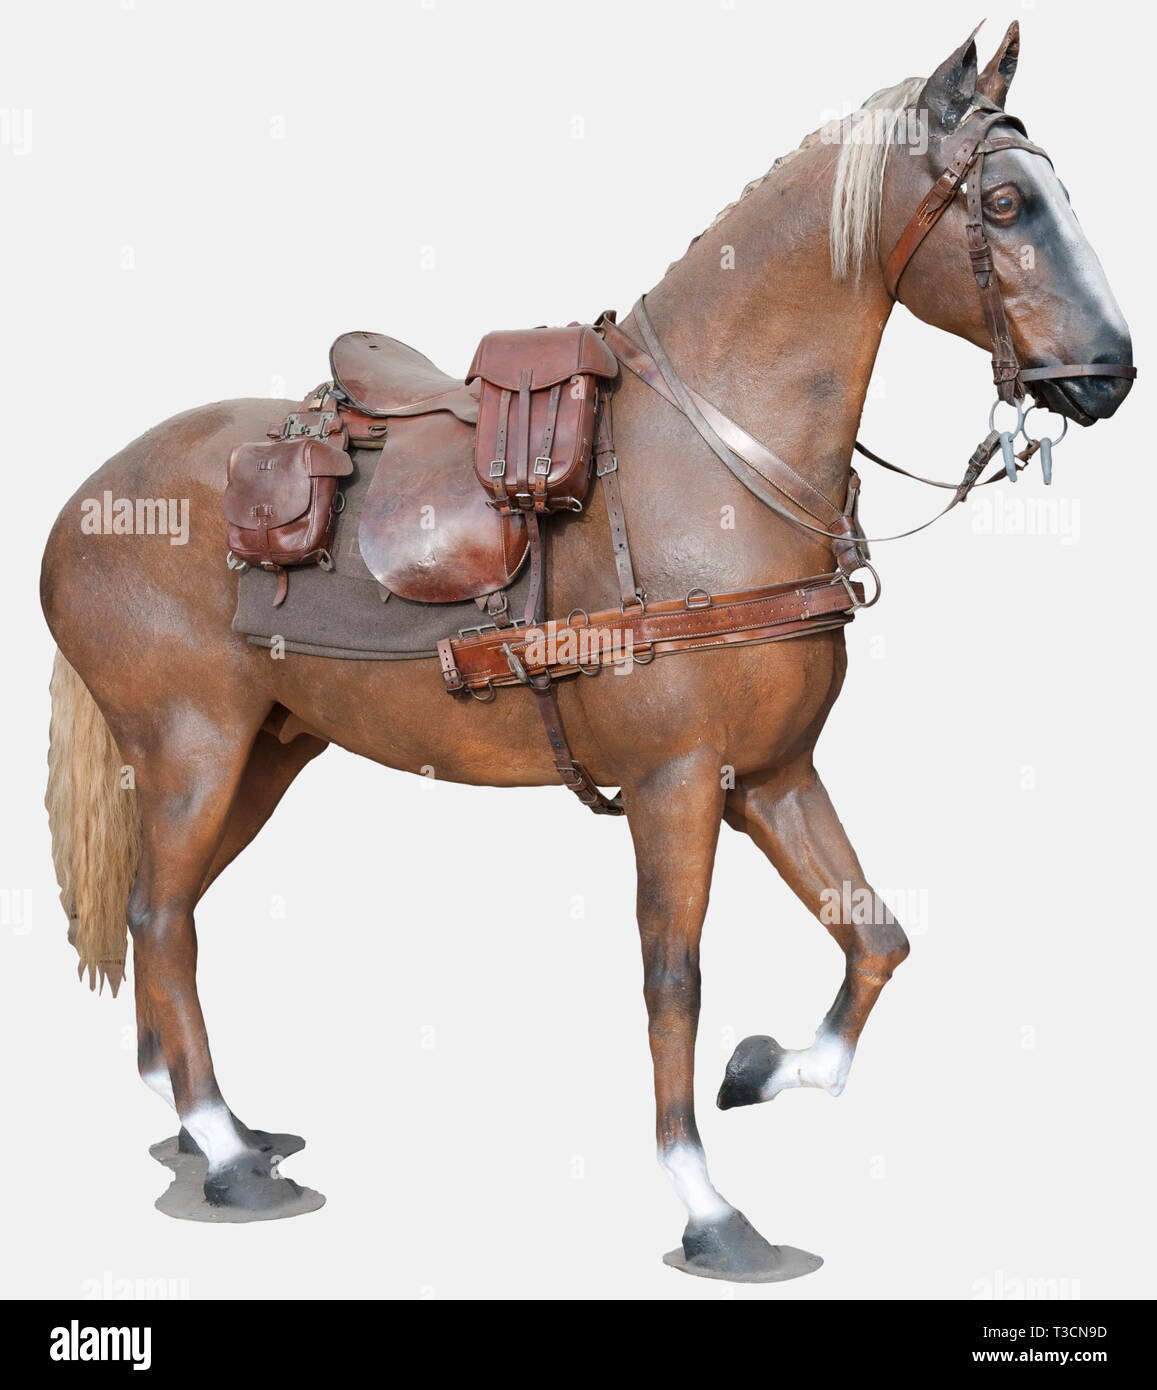 A brown life-size resin horse, with poney tale and mane, incomplete saddle, saddle cloth, bridle, harness, two M34 saddle bags and a small saddle bag. Height approx. 2.20 m, length approx. 2.50 m. historic, historical, 20th century, utensil, piece of equipment, utensils, item, items, object, objects, stills, clipping, clippings, cut out, cut-out, cut-outs, Additional-Rights-Clearance-Info-Not-Available Stock Photo